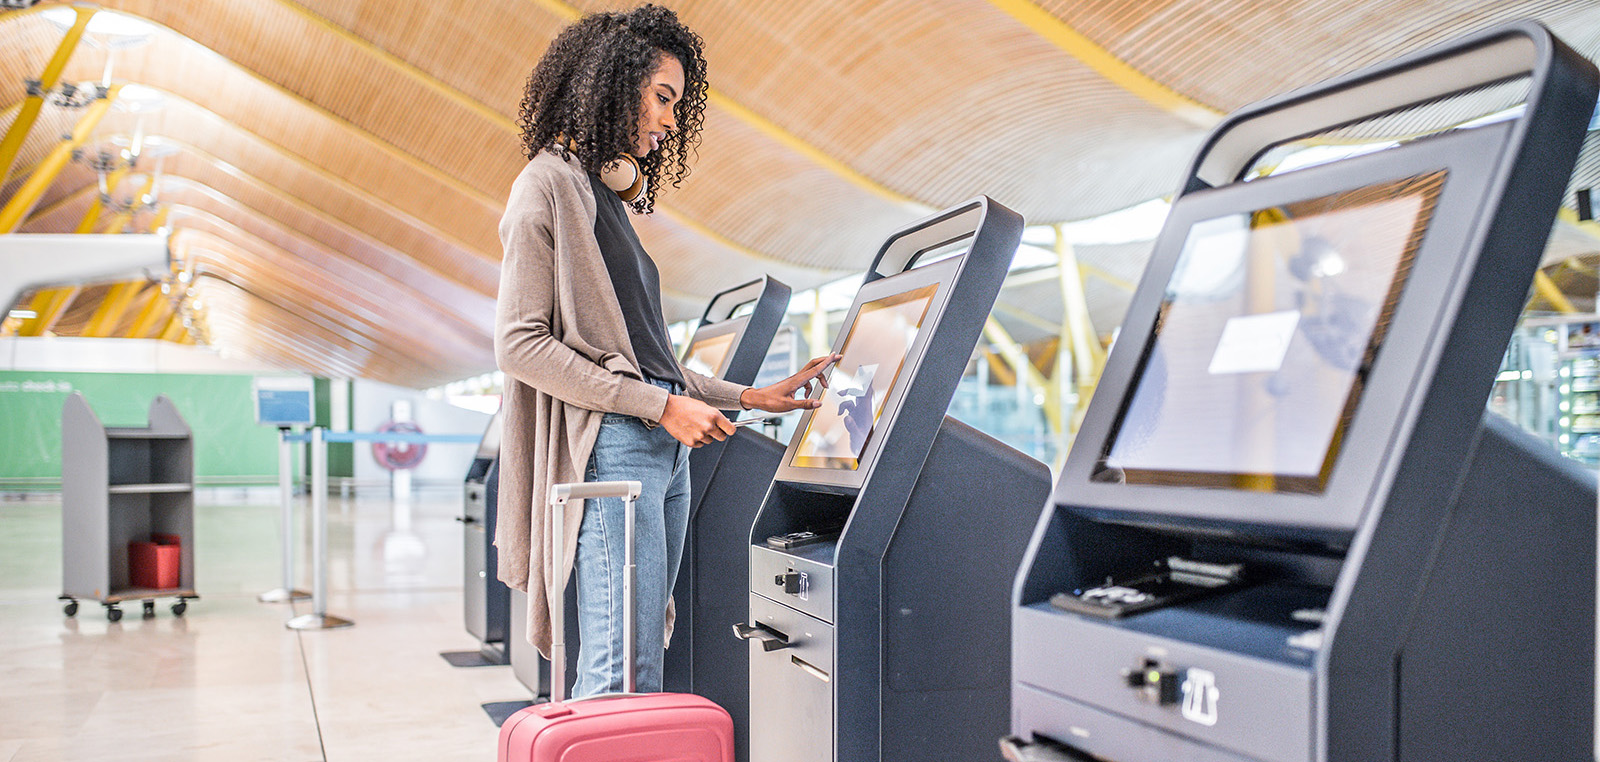 //www.experienceaisolutions.com/wp-content/uploads/2019/05/airport-security-v2.jpg